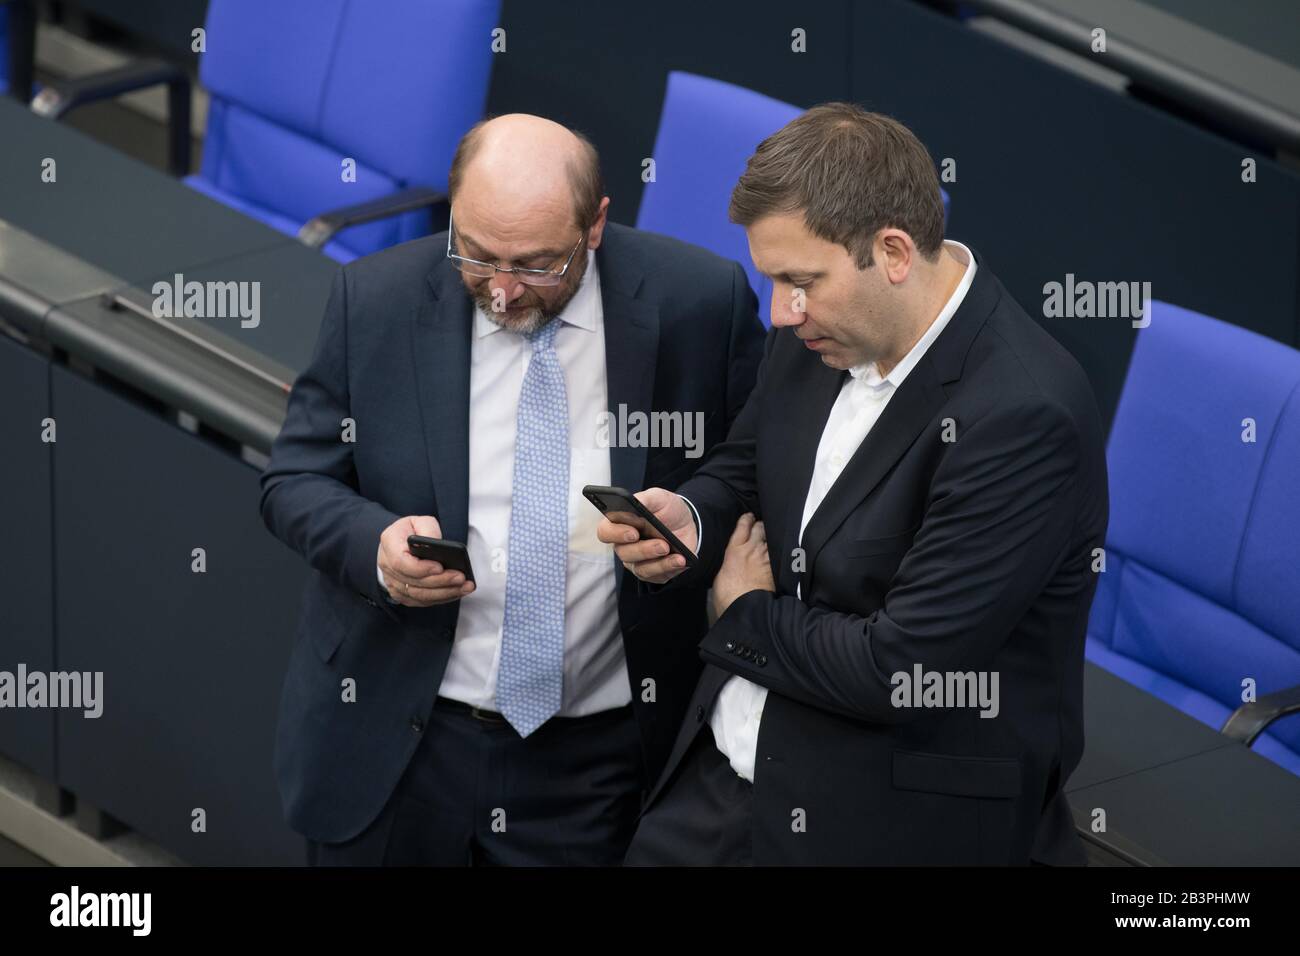 05 March 2020, Berlin: Martin Schulz (l, SPD) and Lars Klingbeil (SPD), Secretary General, look at their telephones during the 149th session of the Bundestag. Photo: Jörg Carstensen/dpa Stock Photo